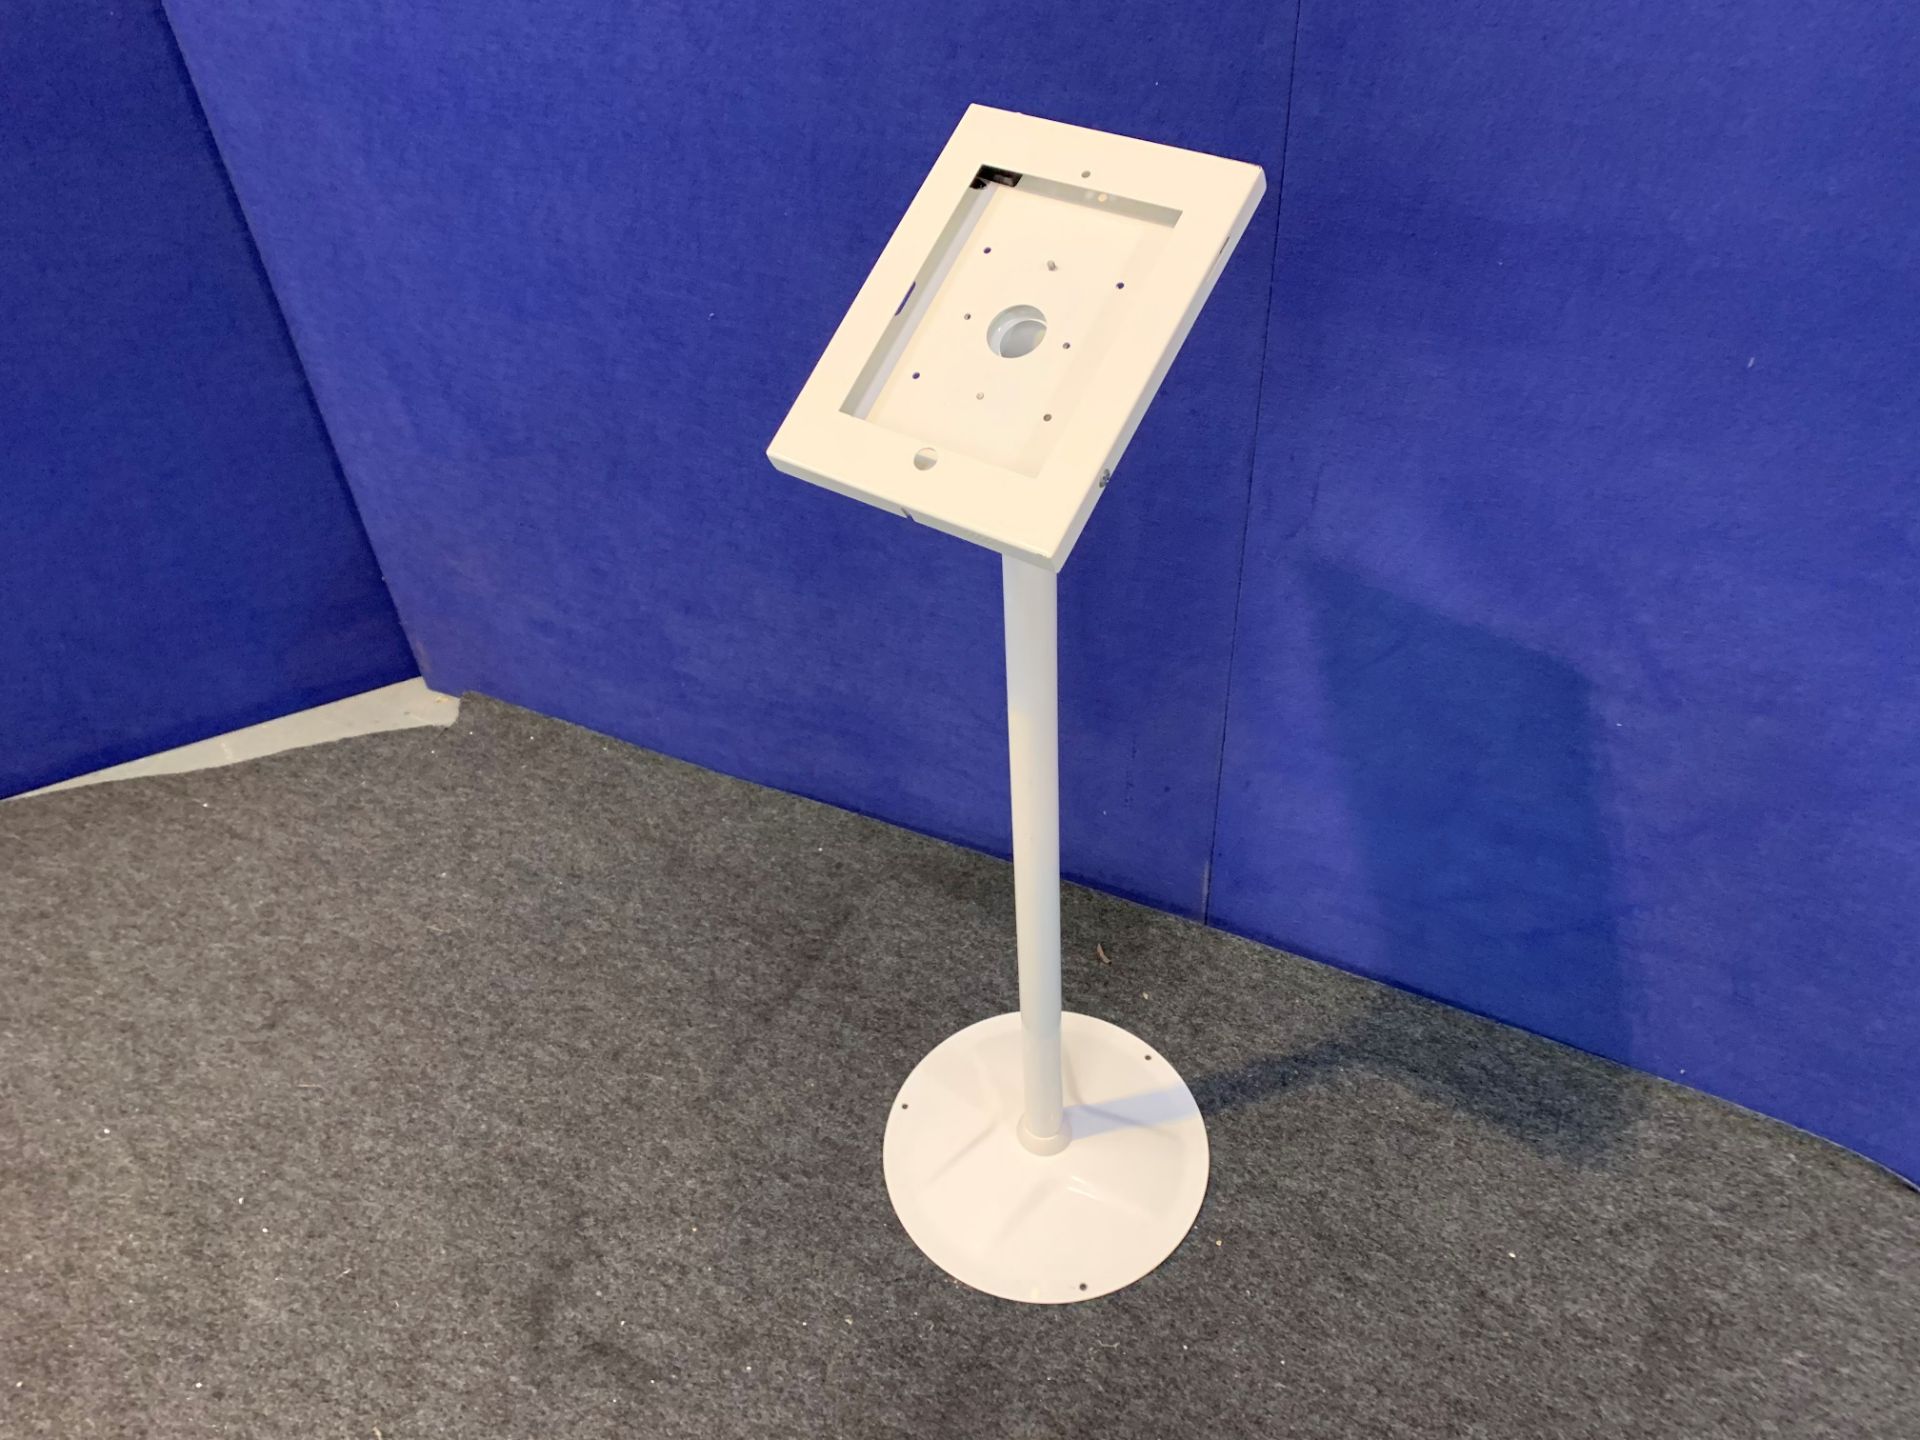 White IPAD Display Stand - Set up for IPAD Air 2 - Image 3 of 3